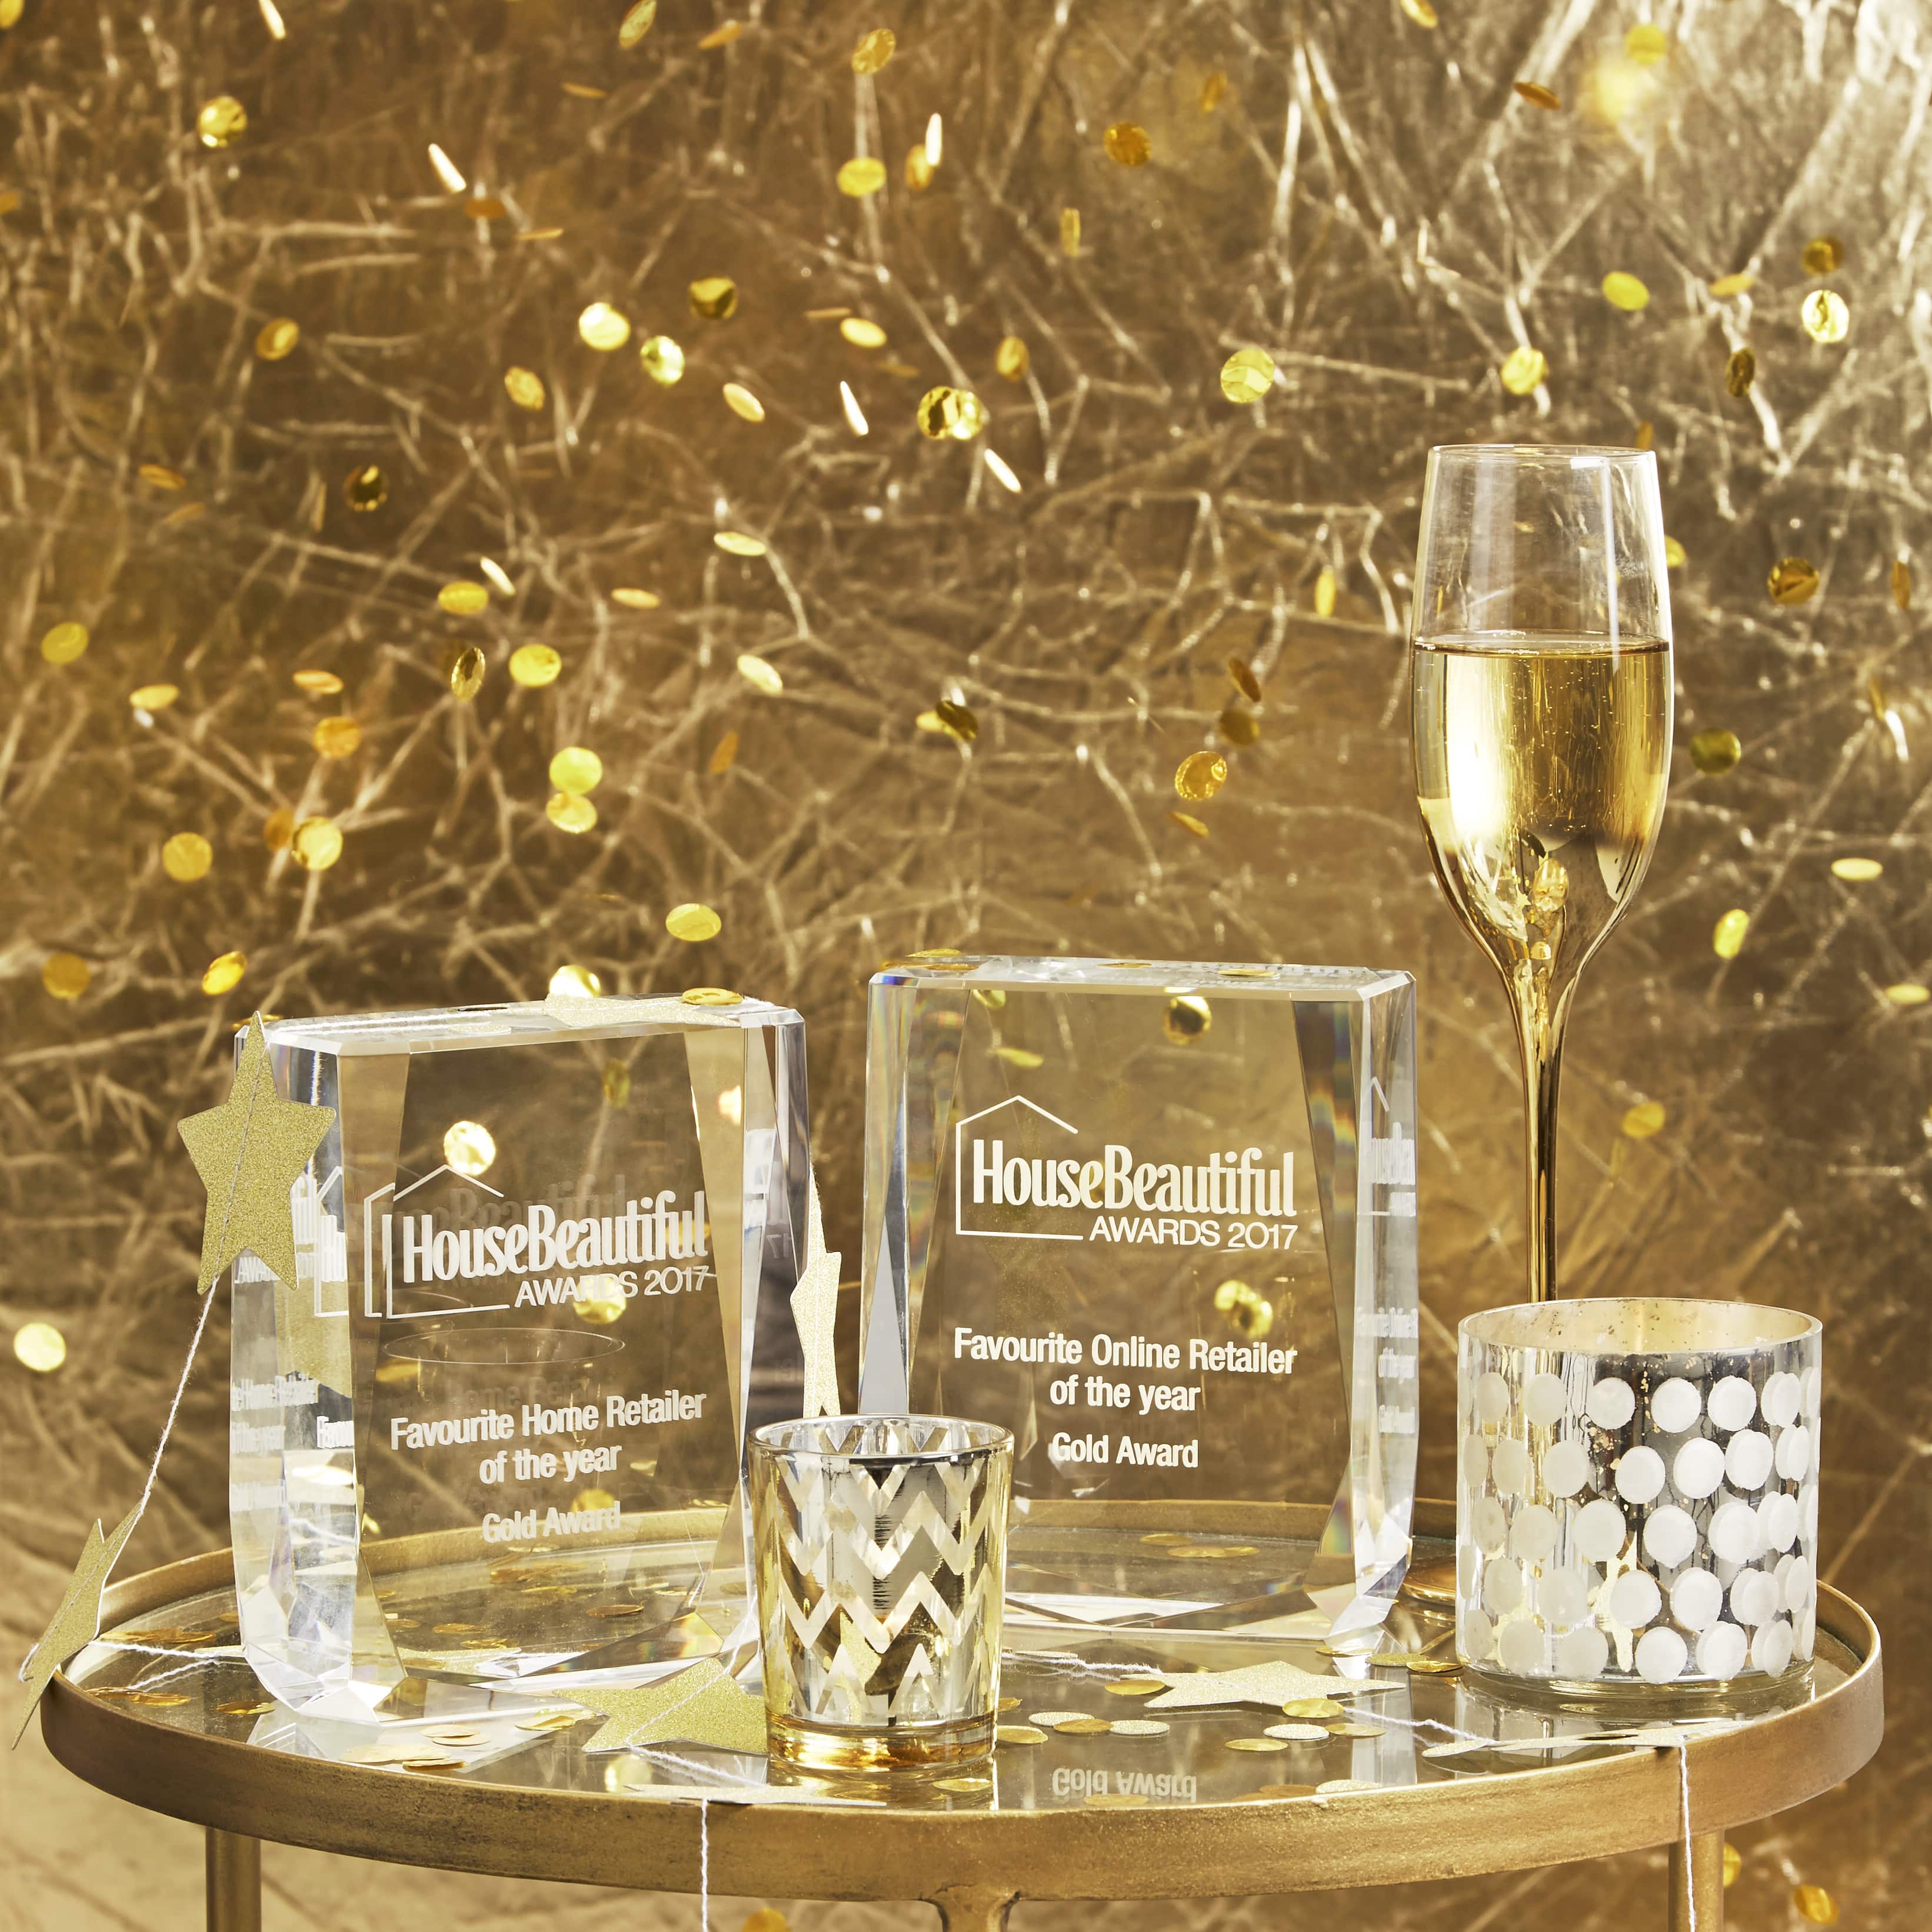 Double Gold for Dunelm at House Beautiful Awards